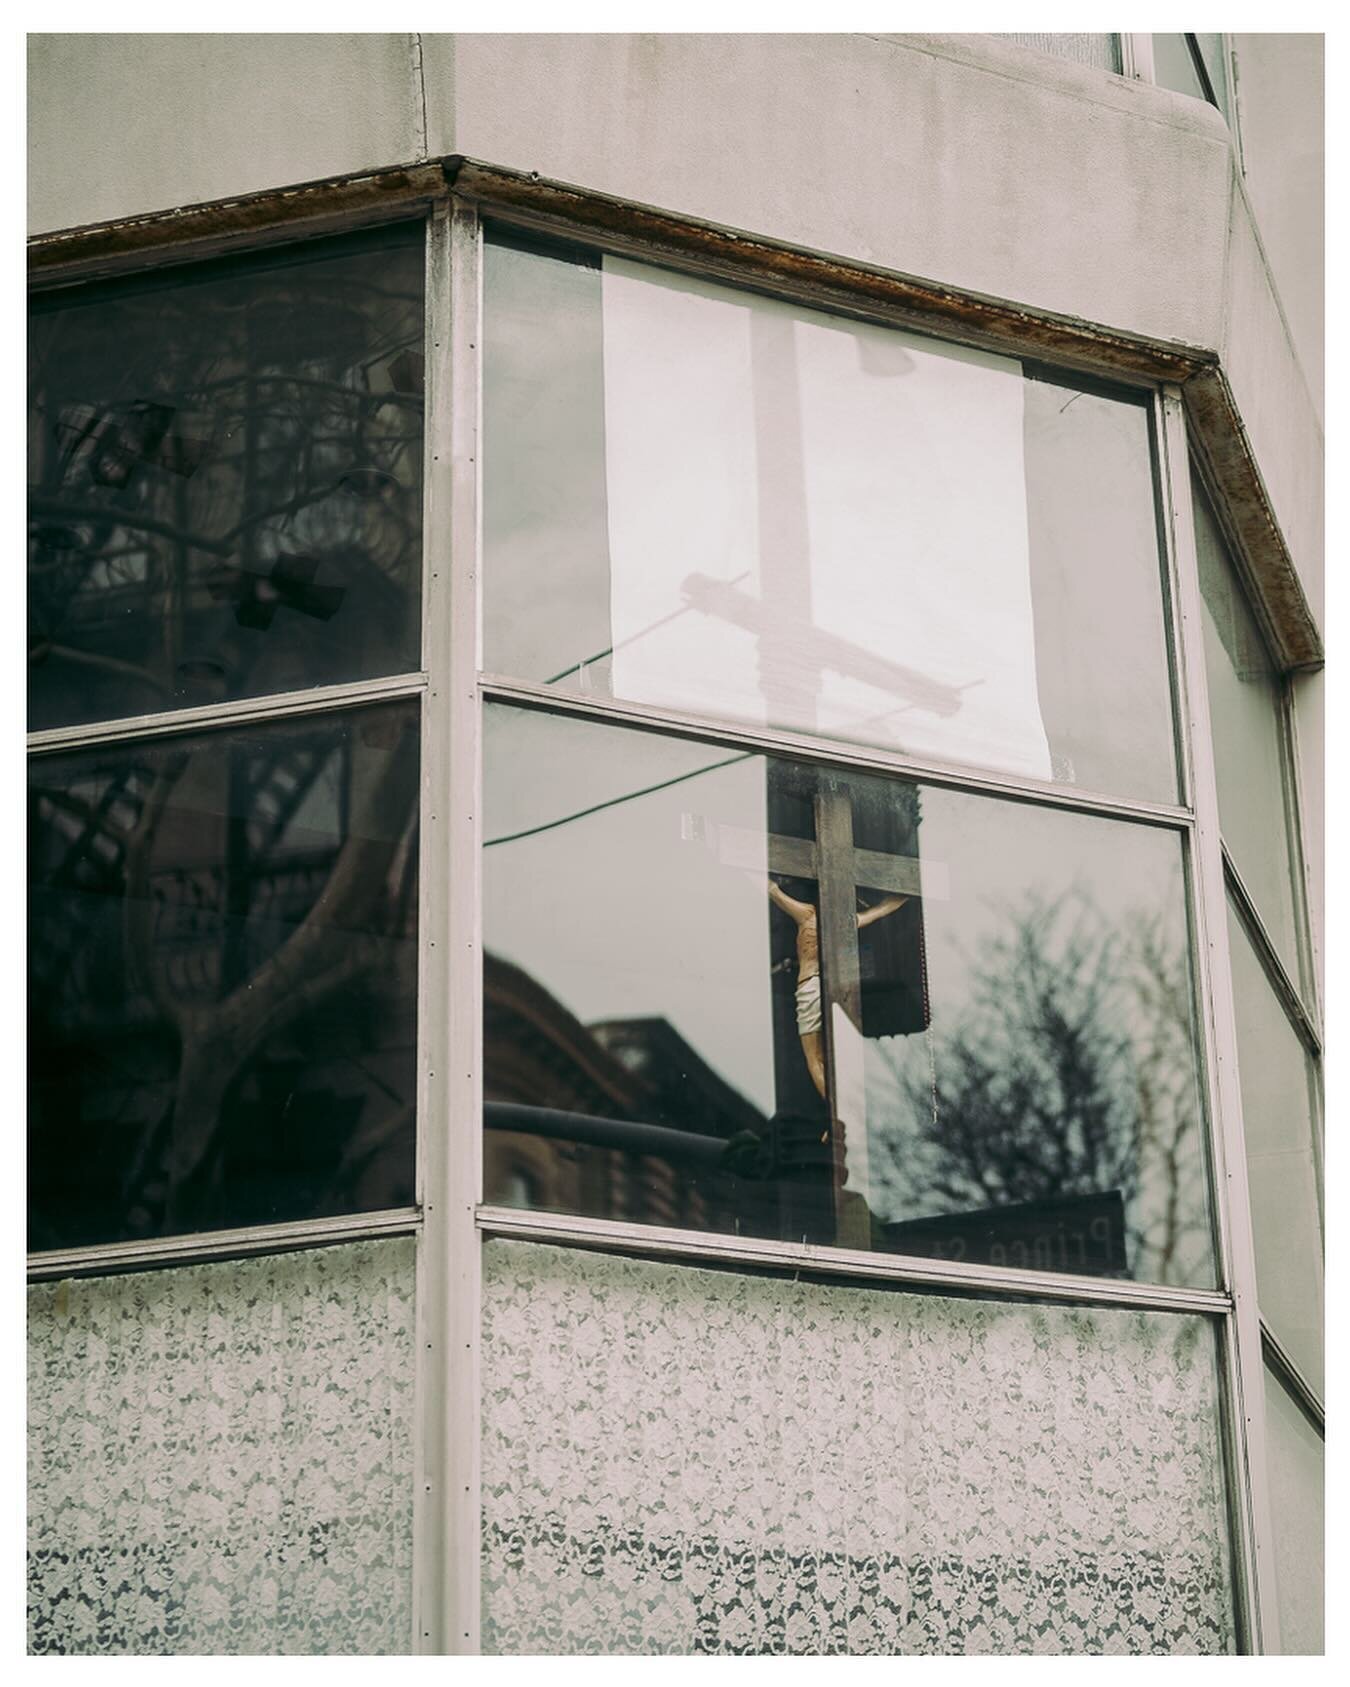 A short day of reflections
&bull;
&bull;
&bull;
&bull;
#reflections #crucifix #abstract #streetphotography #street #50mm